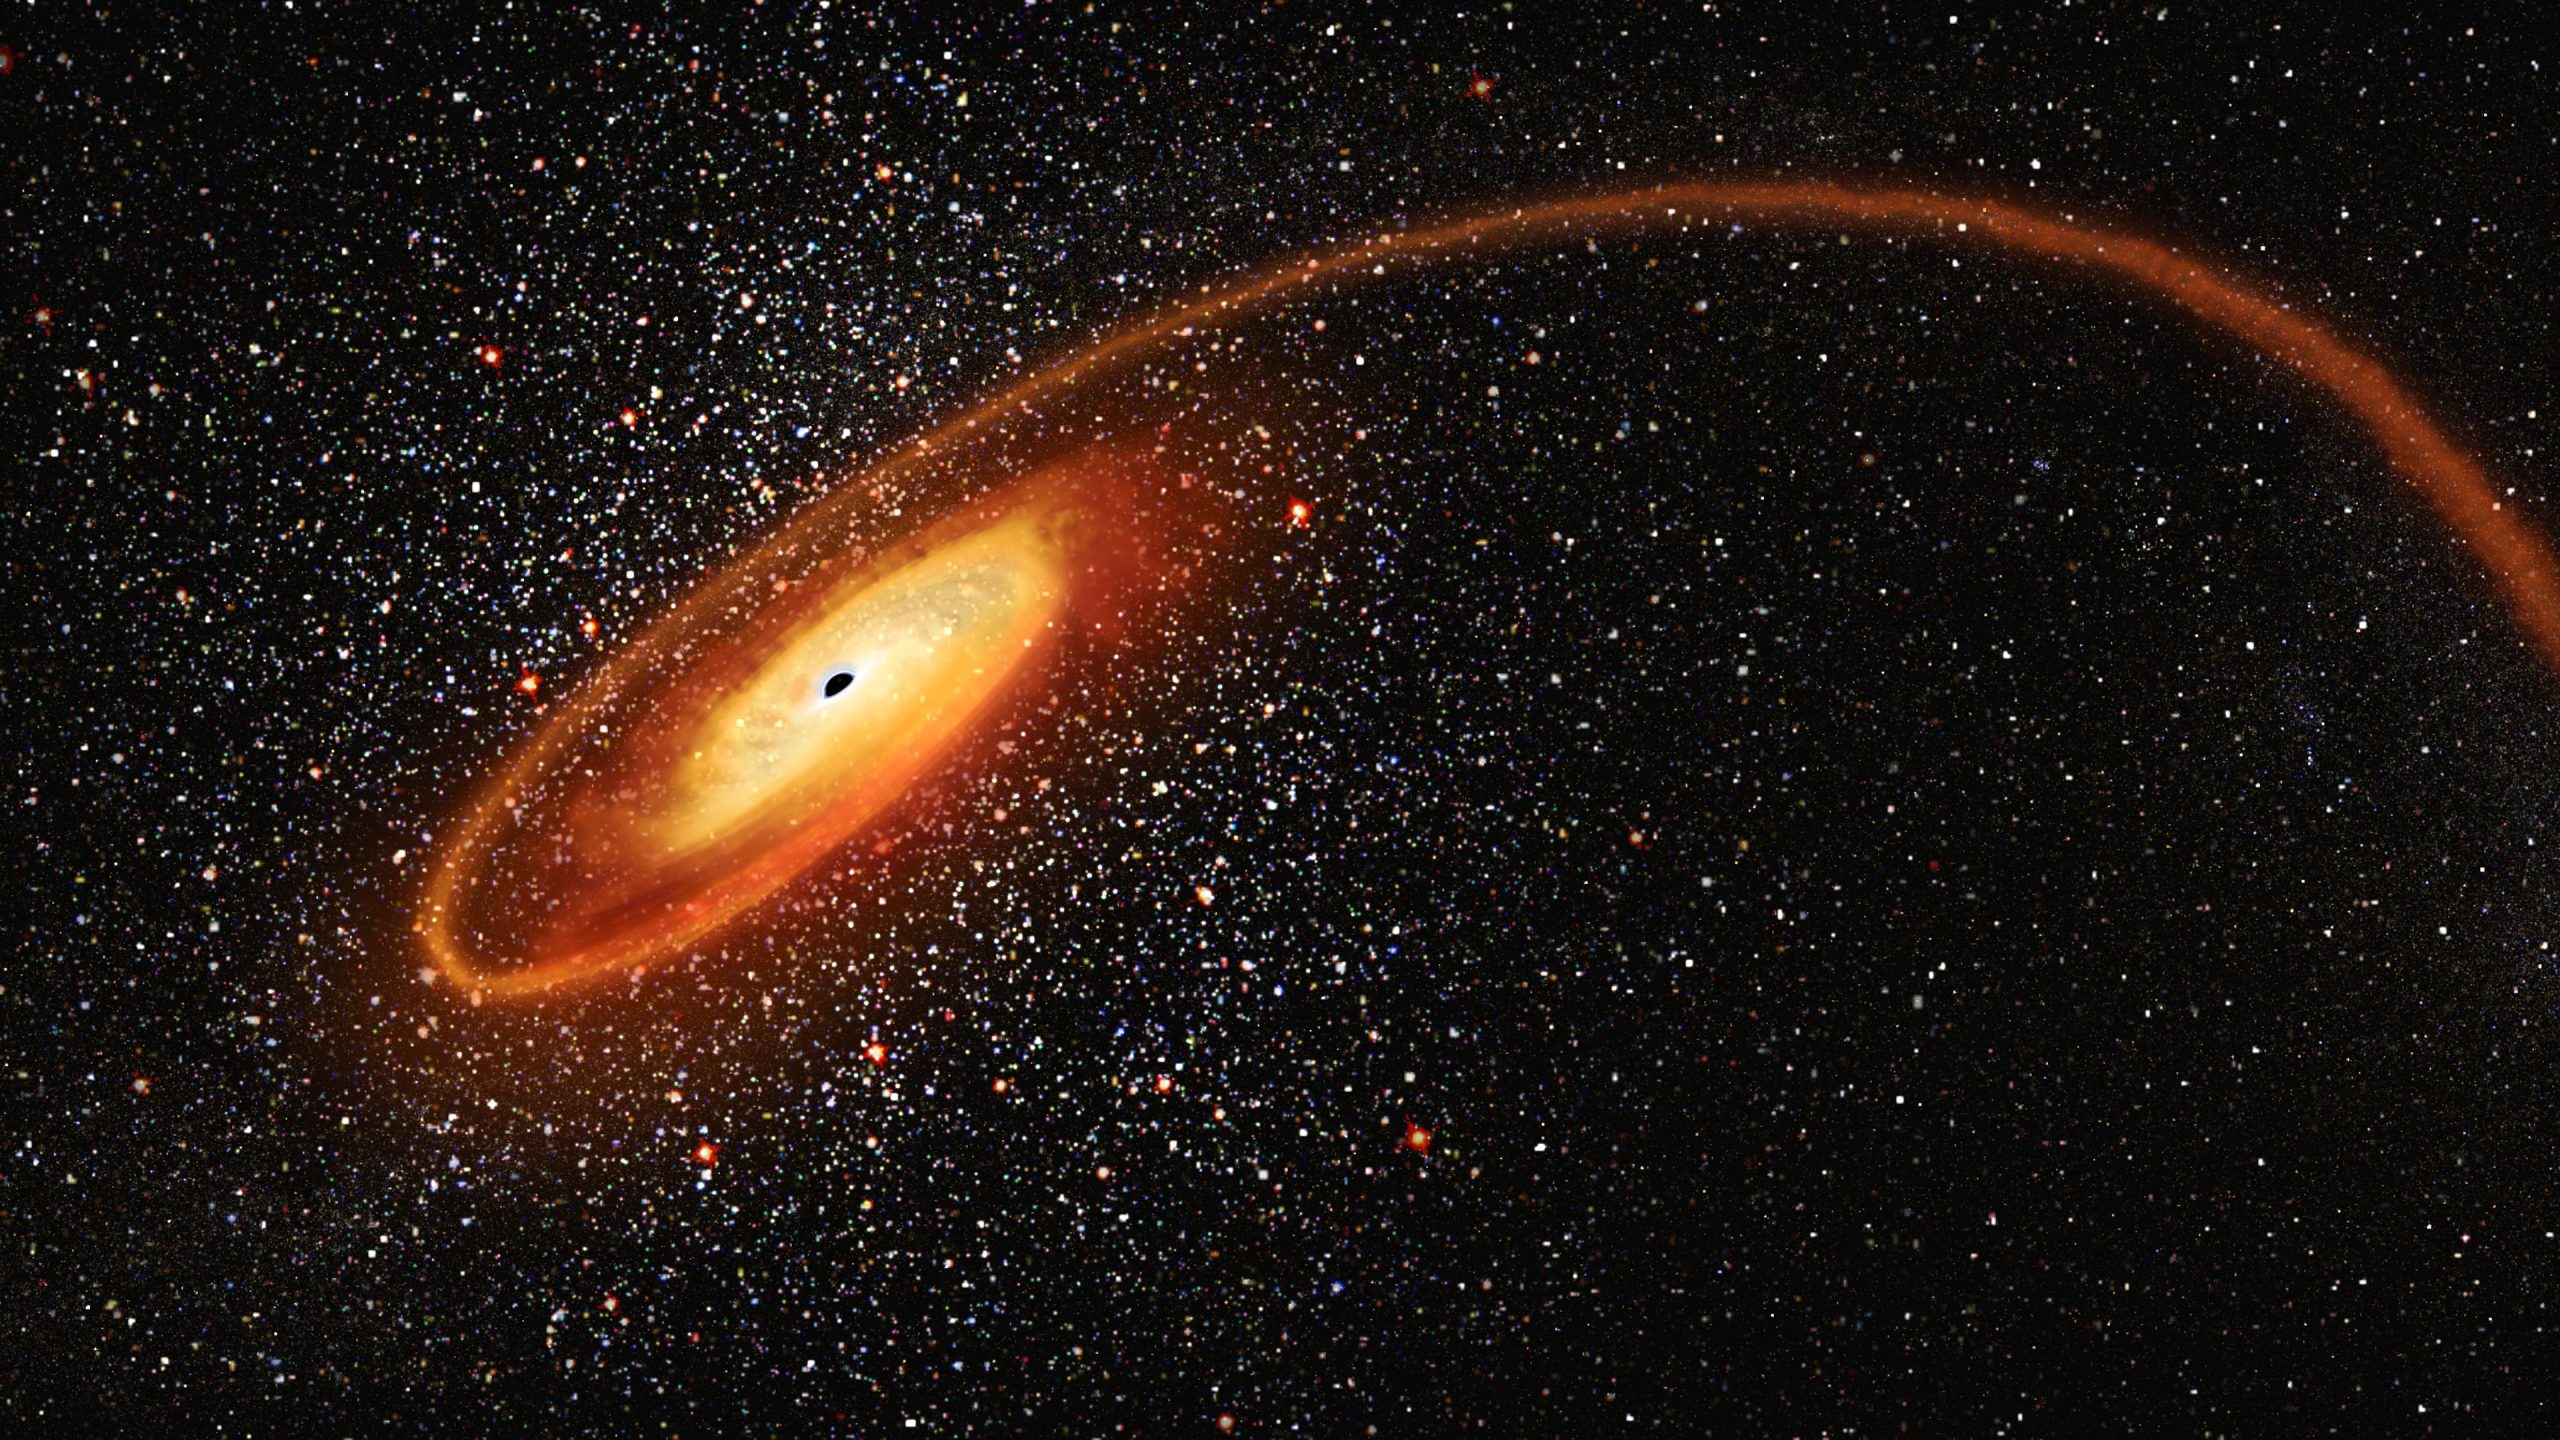 Hubble Finds “Missing Link” Black Hole Tearing Apart a Star That Passed Too Close [Video]